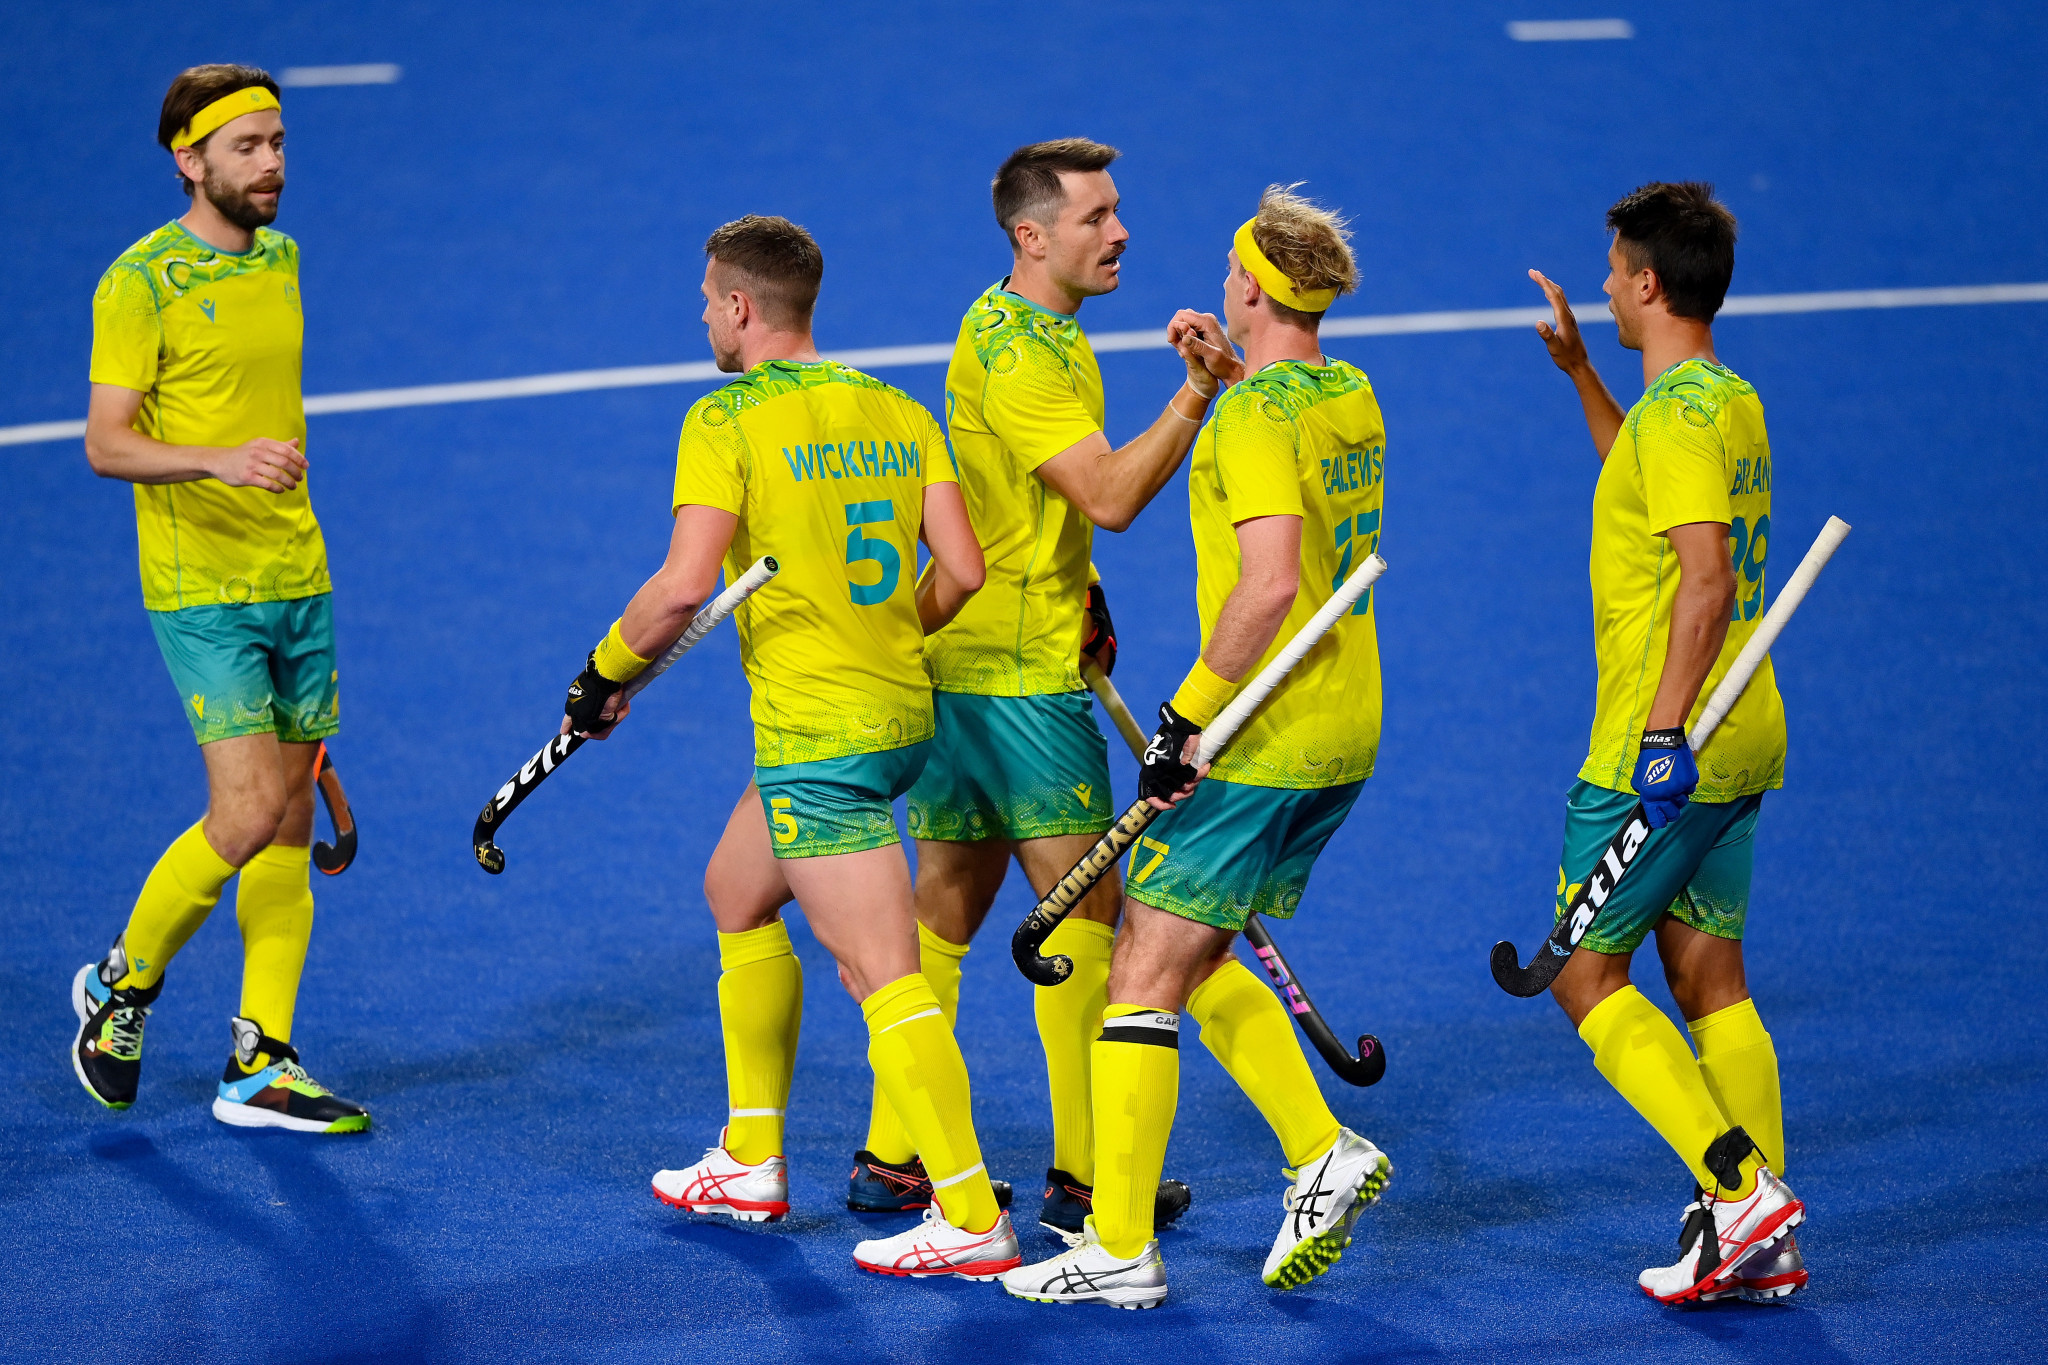 Hockey is among a number of sports that Geelong is due to host during the Commonwealth Games ©Getty Images